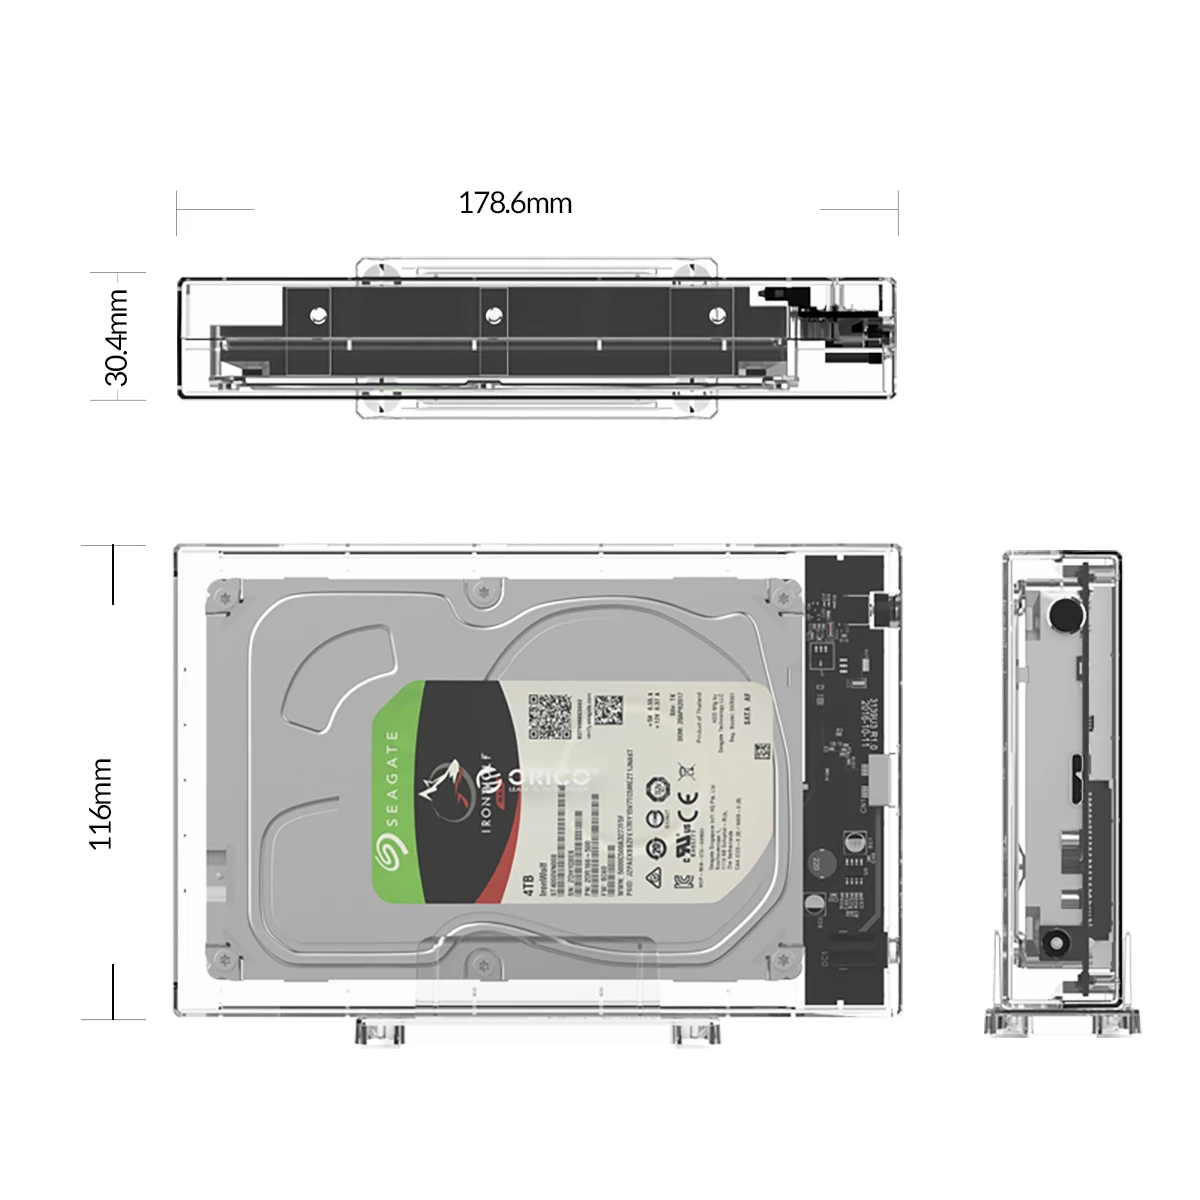 3.5 hdd enclosure ORICO Transparent 3.5'' HDD Case for 2.5/3.5 inch SSD HDD Box Hard Disk Case SATA to USB 3.0 Hard Drive Enclosure Support 16TB external hard drive enclosure 3.5 HDD Box Enclosures